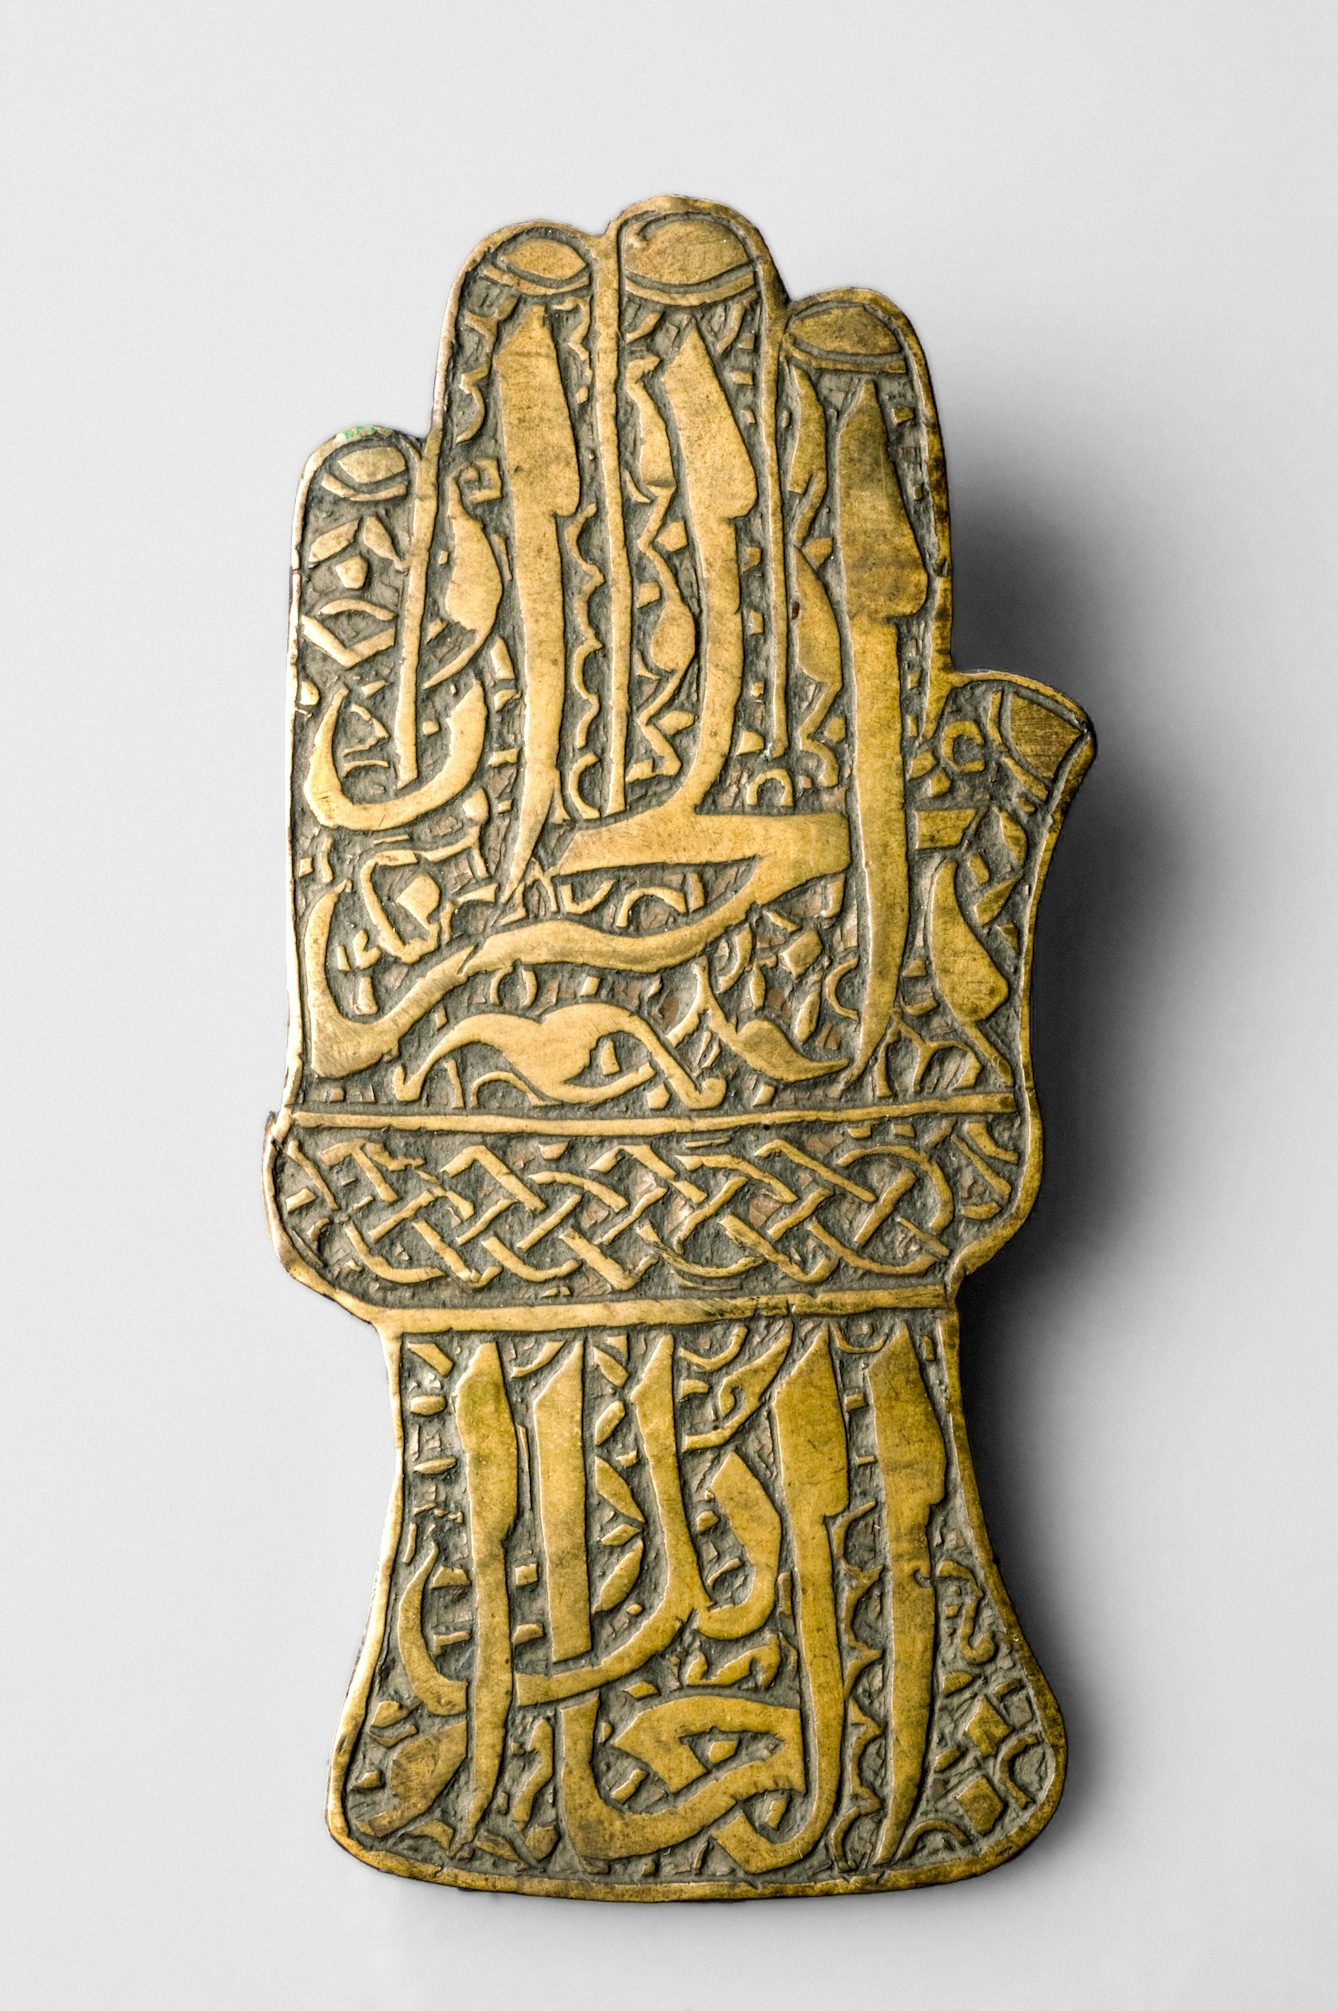 A brass amulet in the shape of the a the left hand, palm facing down. The surface is ornately inscribed with details fo the fingers, thumb and fingernails and arabic text, interspersed with decorative patterns.